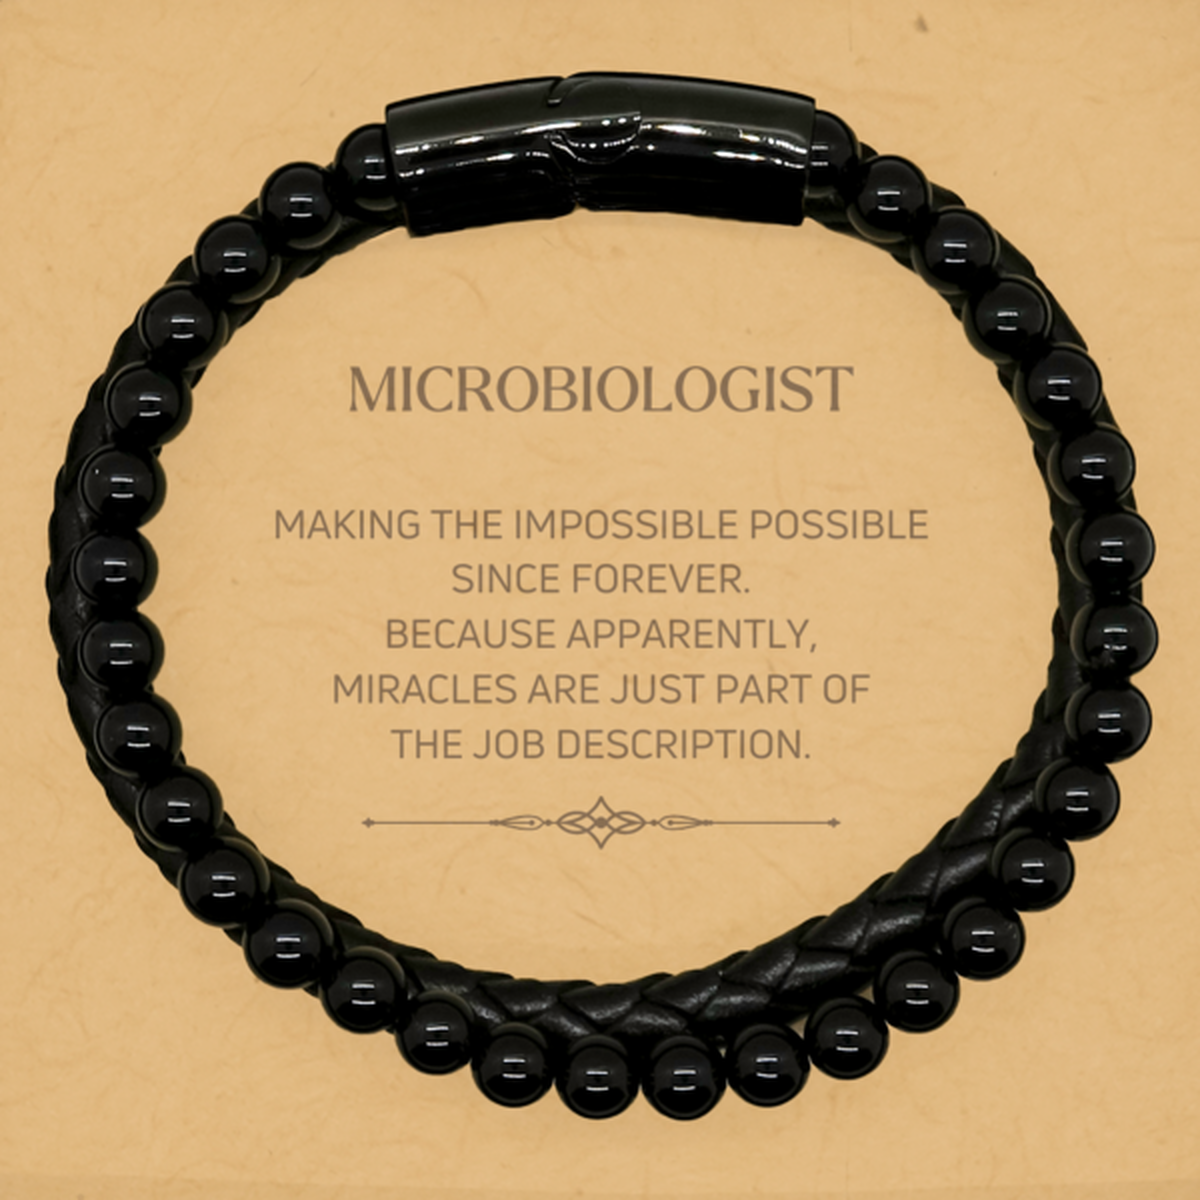 Funny Microbiologist Gifts, Miracles are just part of the job description, Inspirational Birthday Stone Leather Bracelets For Microbiologist, Men, Women, Coworkers, Friends, Boss